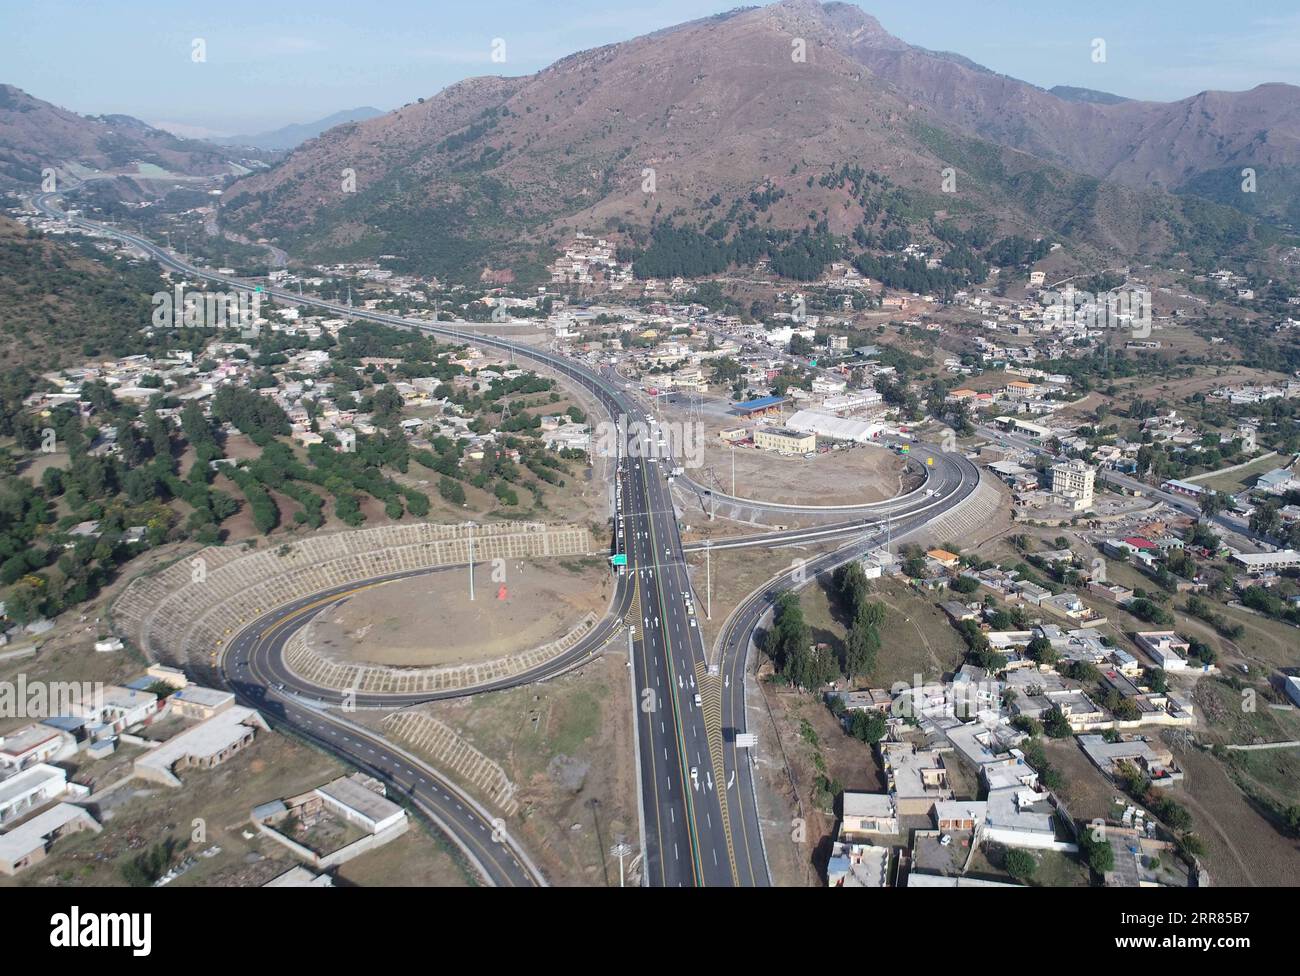 210419 -- ISLAMABAD, April 19, 2021 -- Photo taken on Nov. 18, 2019 shows the expressway section from Havelian to Mansehra under the Karakoram Highway KKH Phase Two project in Pakistan s northwest Khyber Pakhtunkhwa province.  Xinhua Headlines: 6 years on, Xi s Pakistan visit booms development, friendship with shared future LiuxTian PUBLICATIONxNOTxINxCHN Stock Photo